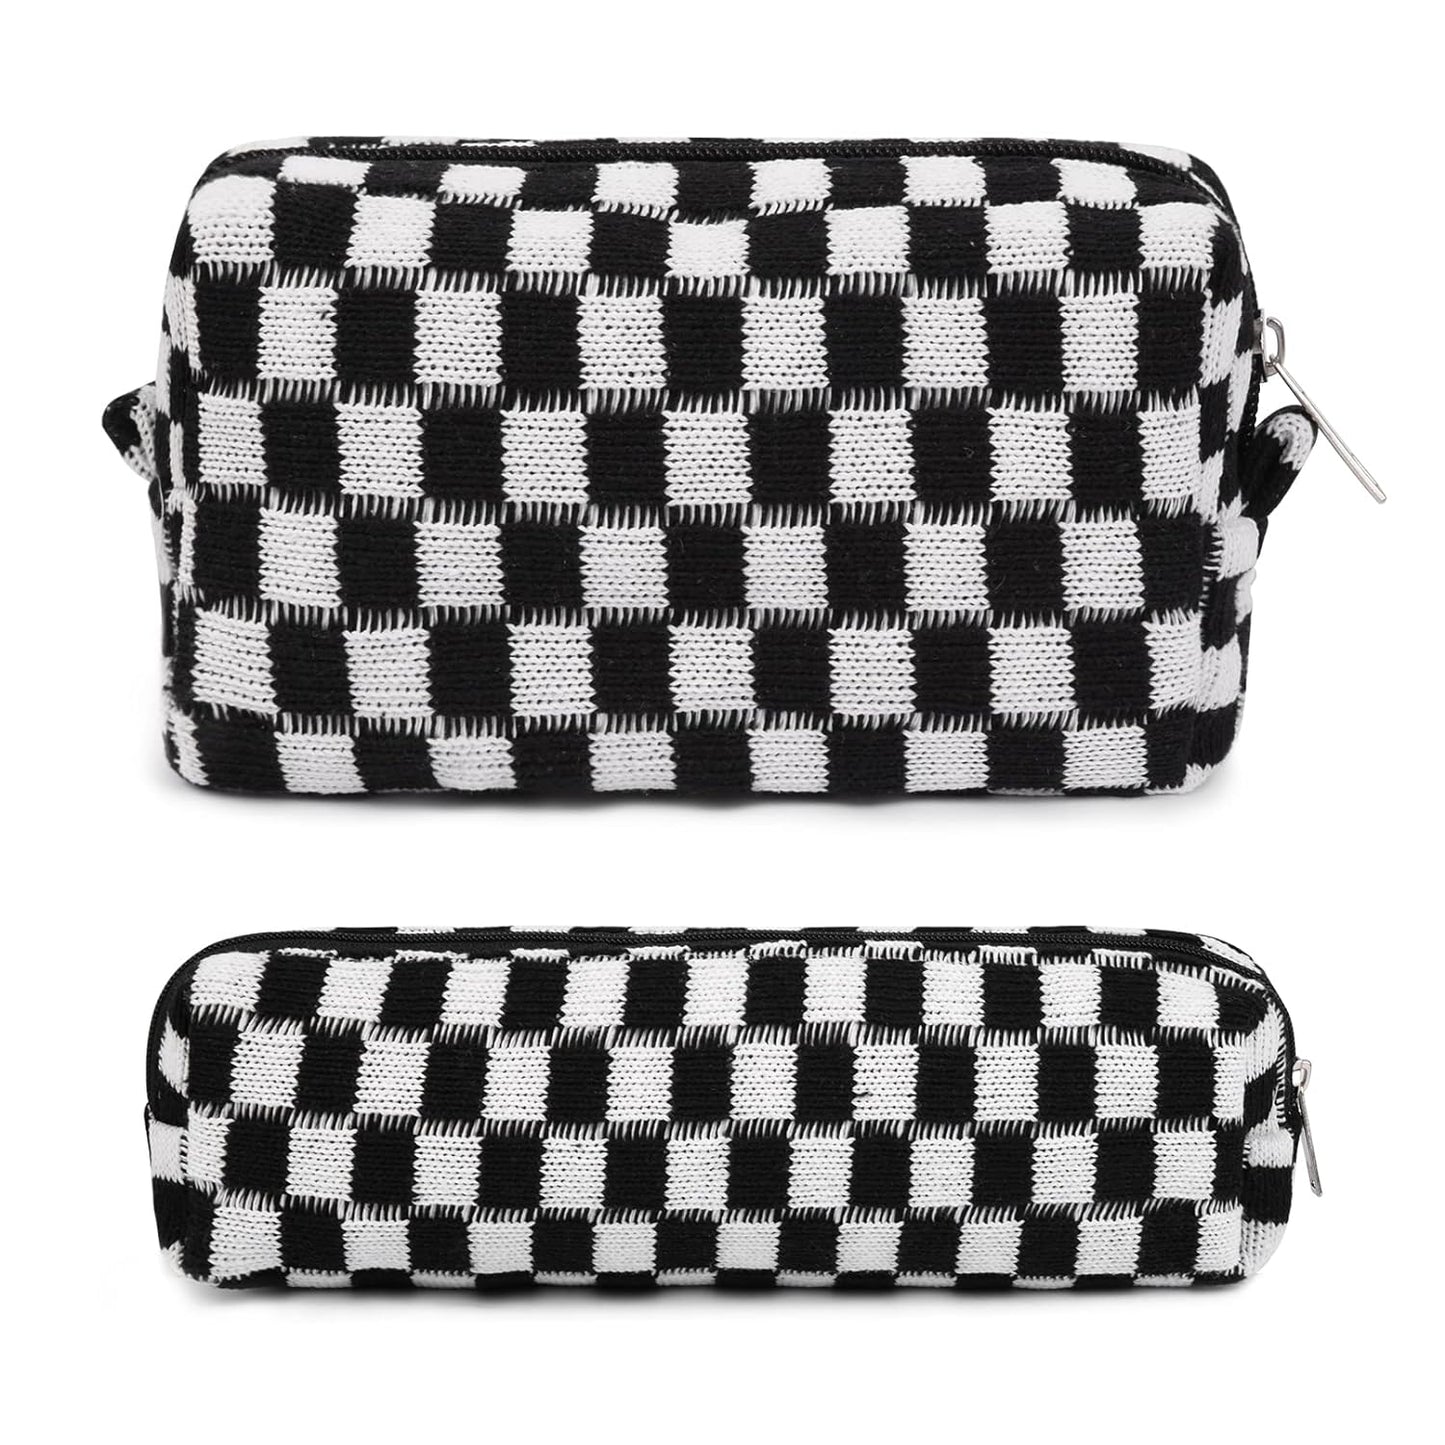 2 Pieces Makeup Bag Pouch Checkered Cosmetic Bag Pink Green, Travel Toiletry Bag Organizer Cute Makeup Brushes Storage Bag for Women